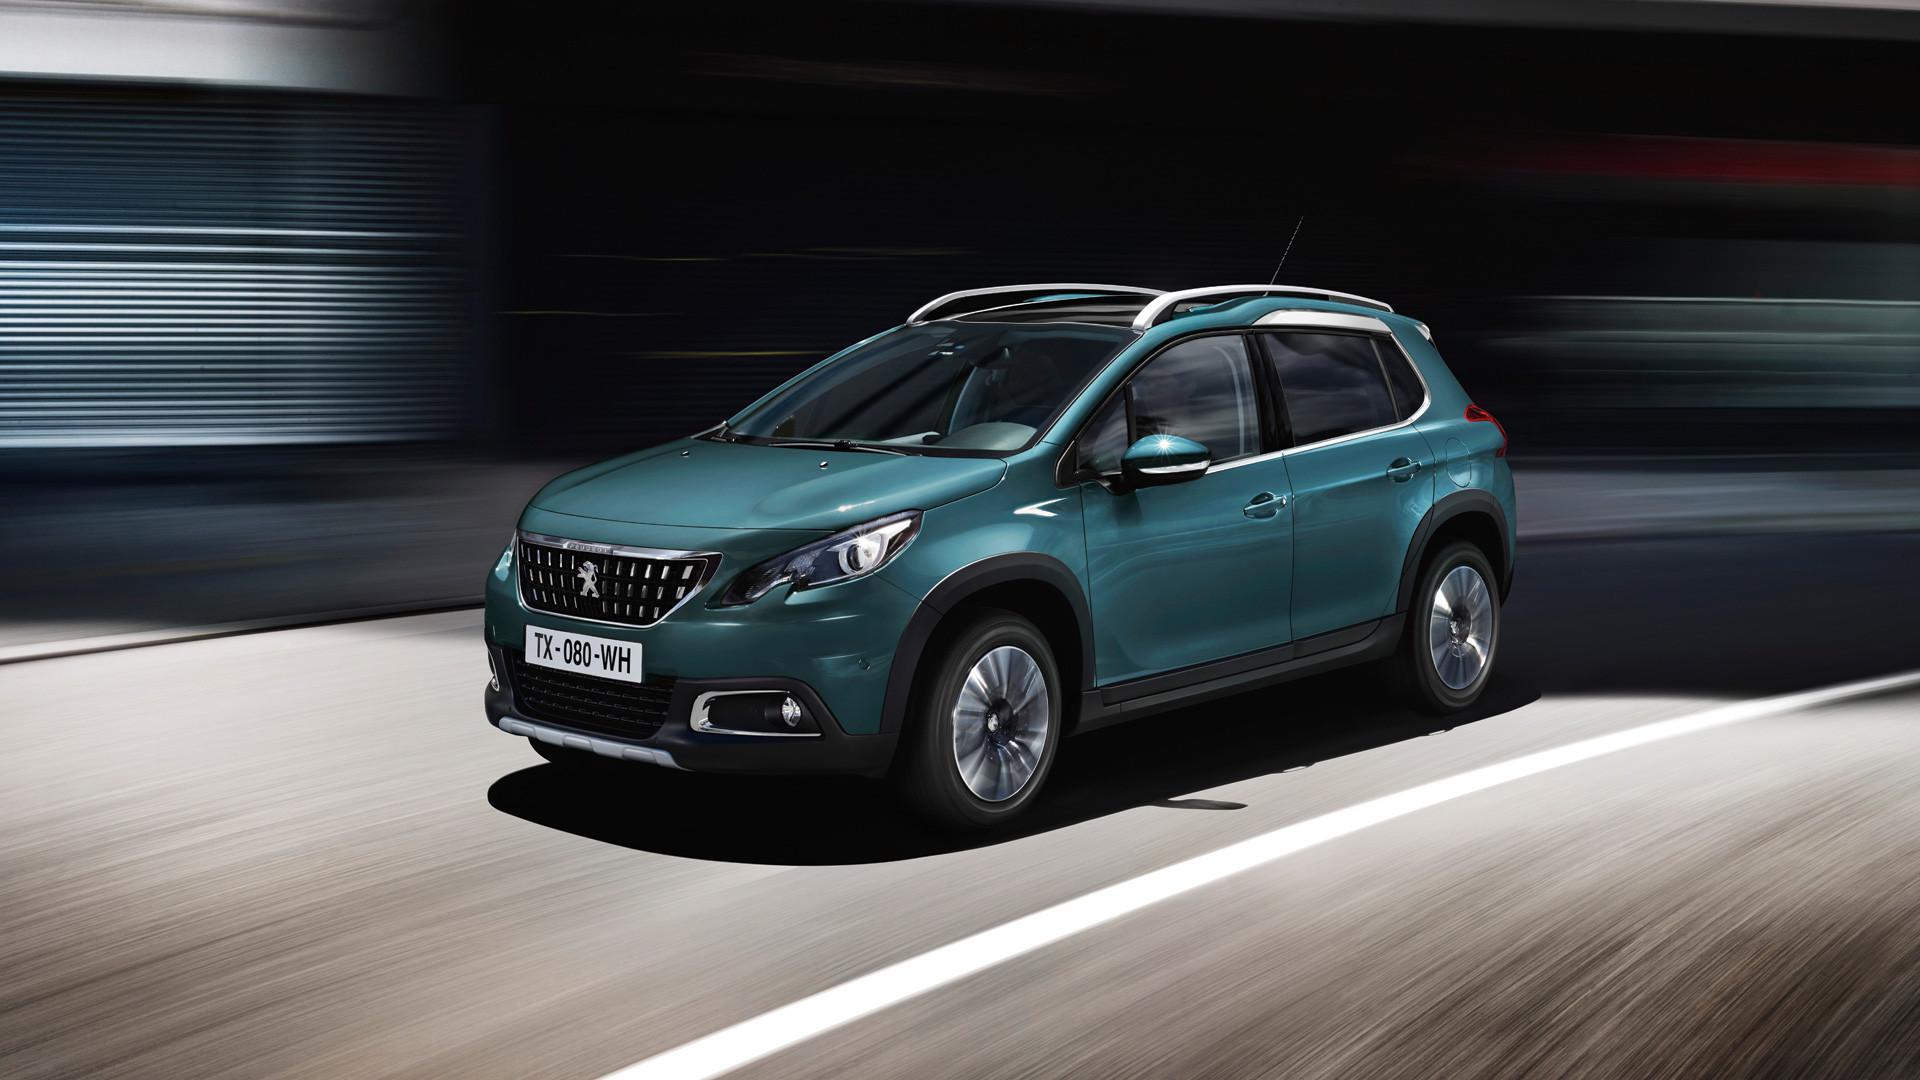 PEUGEOT 2008 New Car Showroom. SUV. Test Drive Today